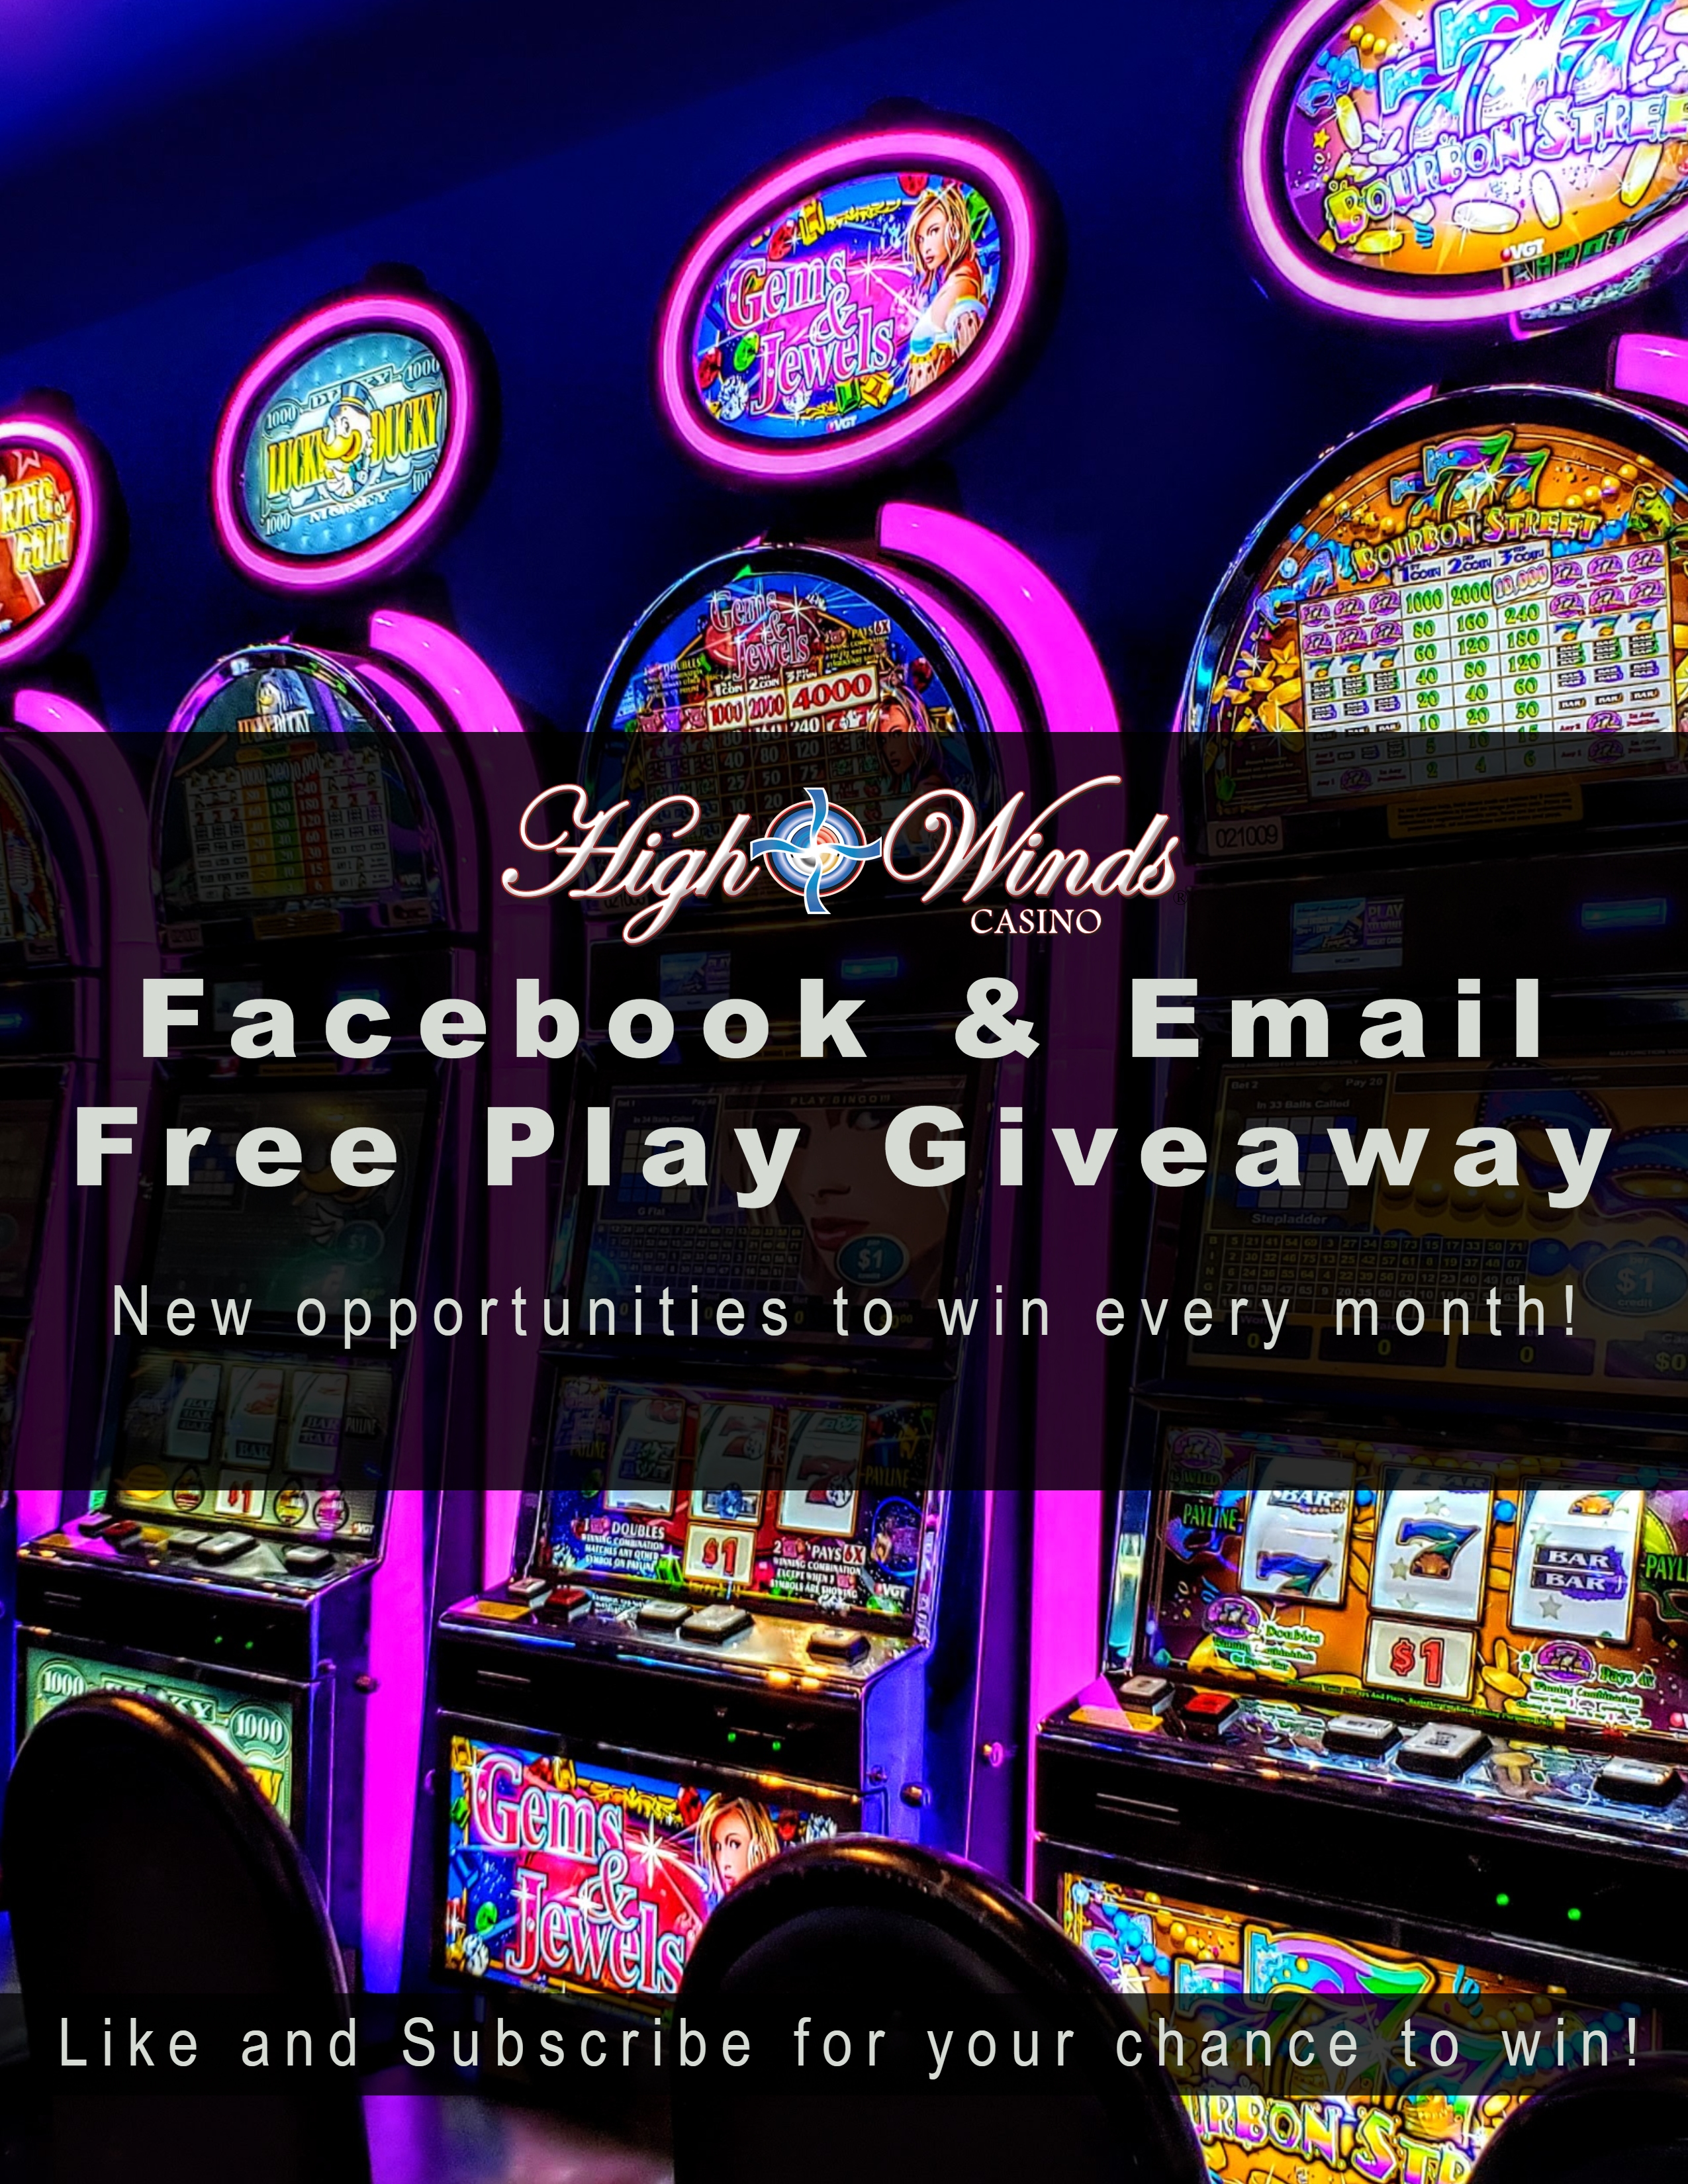 Win Online Become a winner before you walk through our door! The fun with High Winds Casino starts right here online! Follow us on Facebook to keep up to date on our latest promotions, congratulate our newest winners, participate in Facebook giveaways and have a laugh or two with memes and relatible content. Subscribe to our email newsletters for more opportunities to win and to catch up on the latest news from here at the casino. 